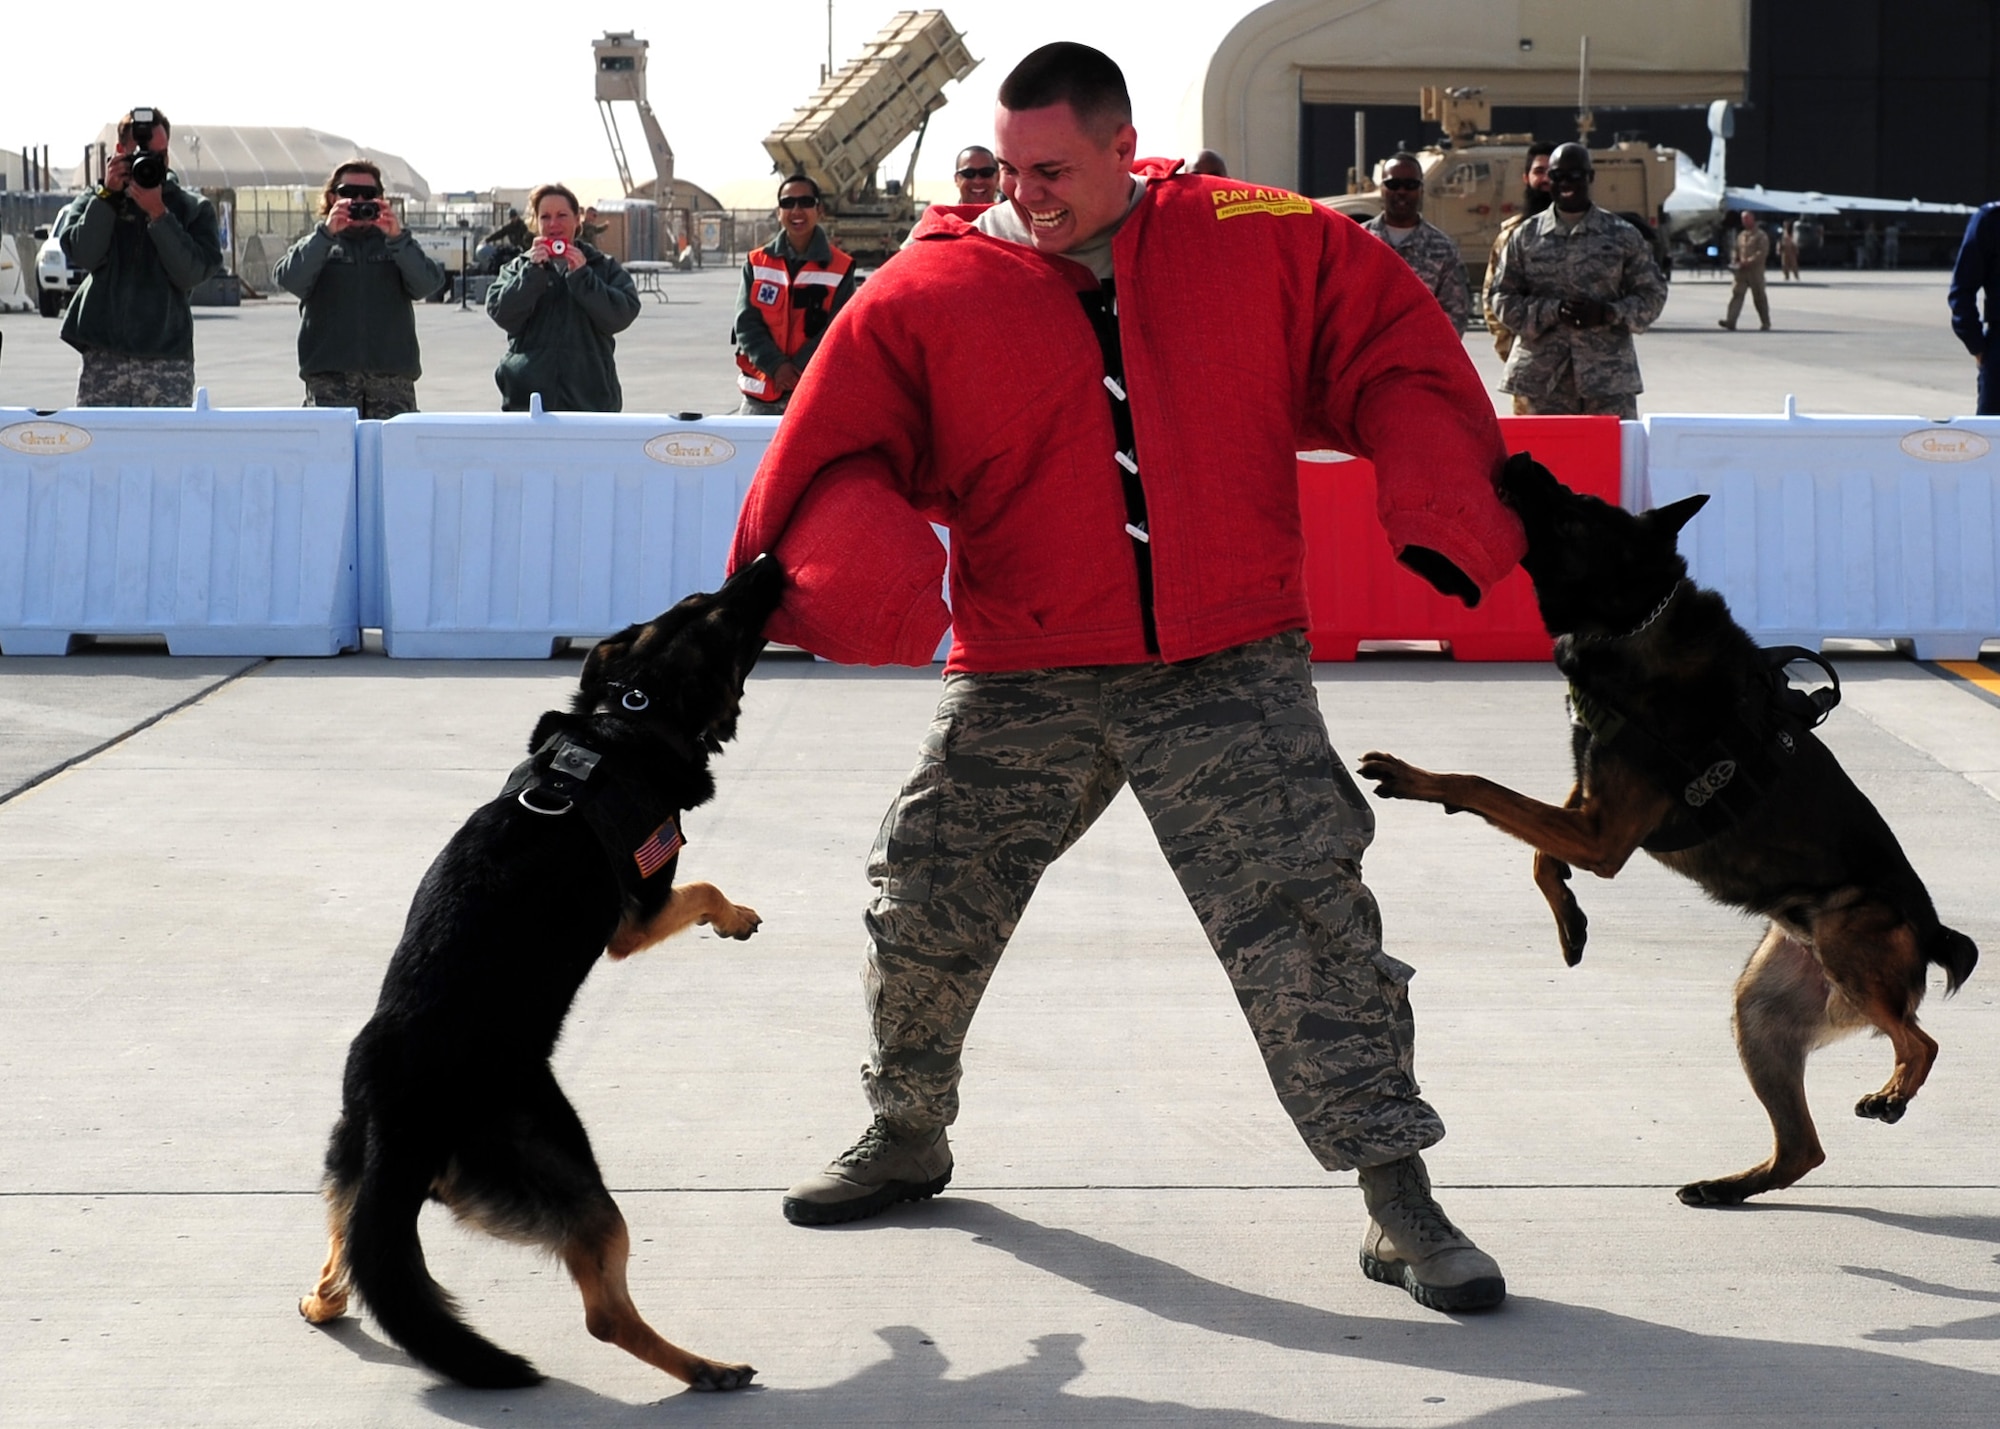 SOUTHWEST ASIA – 379th Expeditionary Security Forces Squadron members participate in a working dog demonstration display during the annual Flight Line Fest Jan. 14 at the 379th Air Expeditionary Wing. The event had live music by the U.S. Air Force Central Command Band, static aircraft and was an opportunity for Airmen and non-service members alike to learn more about operations. (U.S. Air Force photo by Master Sgt. Brendan Kavanaugh)